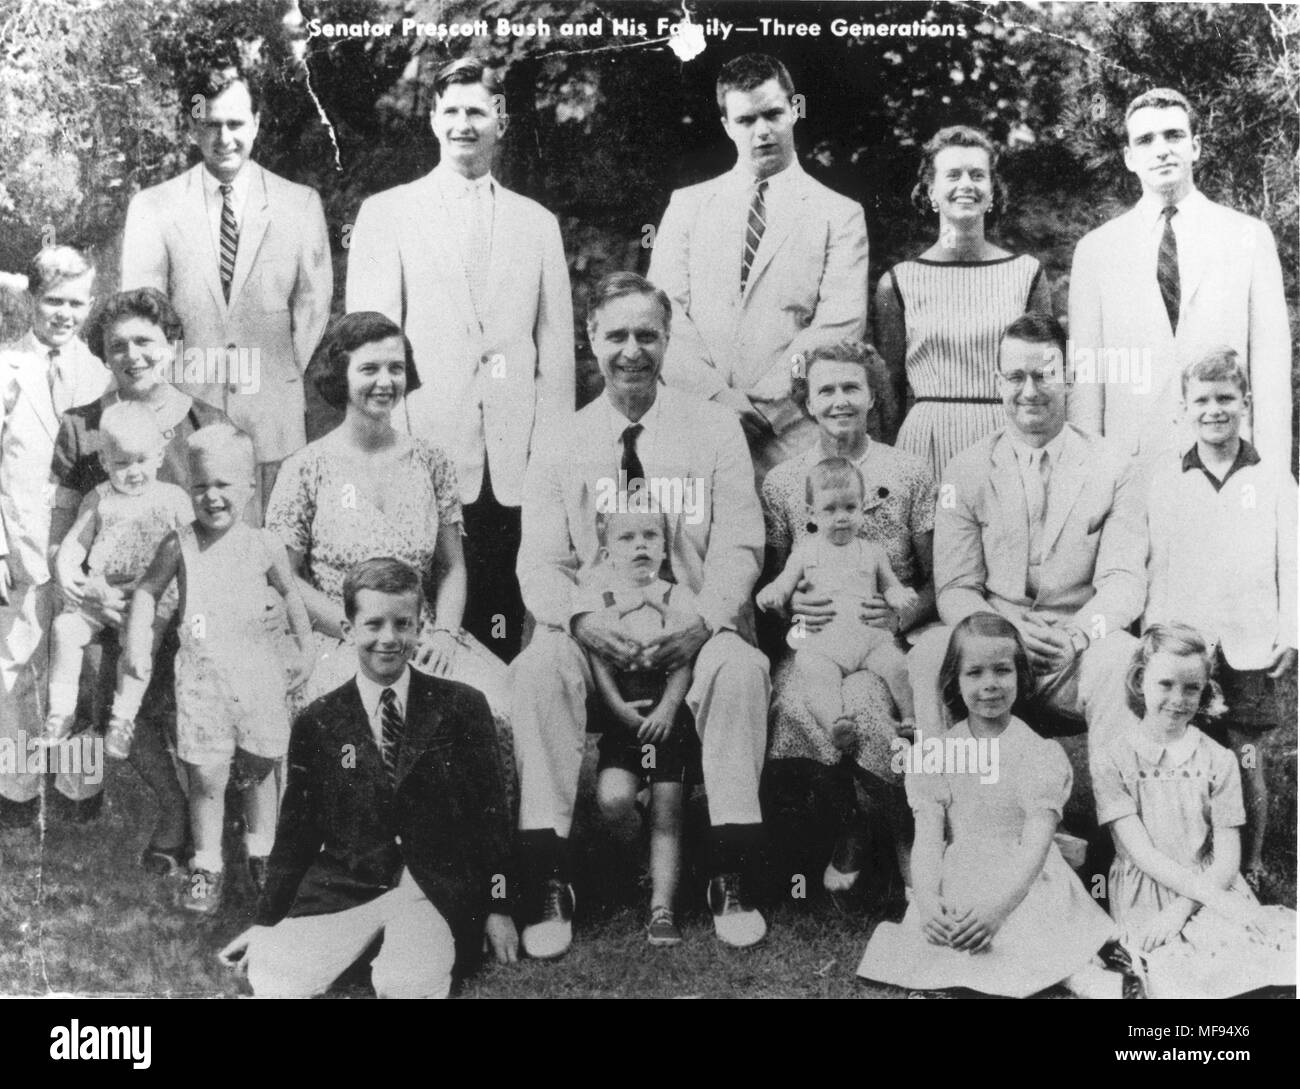 Milton, Massachusetts, USA. 1st Jan, 1956. FILE circa 1956 - United States Senator PRESCOTT BUSH (R-CT), center, and his family. His son, future United States President GEORGE H.W. BUSH (41st President) is in the back row at left, and his grandson, future United States President GEORGE W. BUSH (43rd President) is the young boy farthest at the left. BARBARA BUSH, wife of George H.W. Bush is the woman farthest at left. Son NEIL BUSH is on Barbara's lap and future Florida Governor JEB BUSH is the young boy in shorts in front of her. Credit: White House/CNP/ZUMA Wire/Alamy Live News Stock Photo